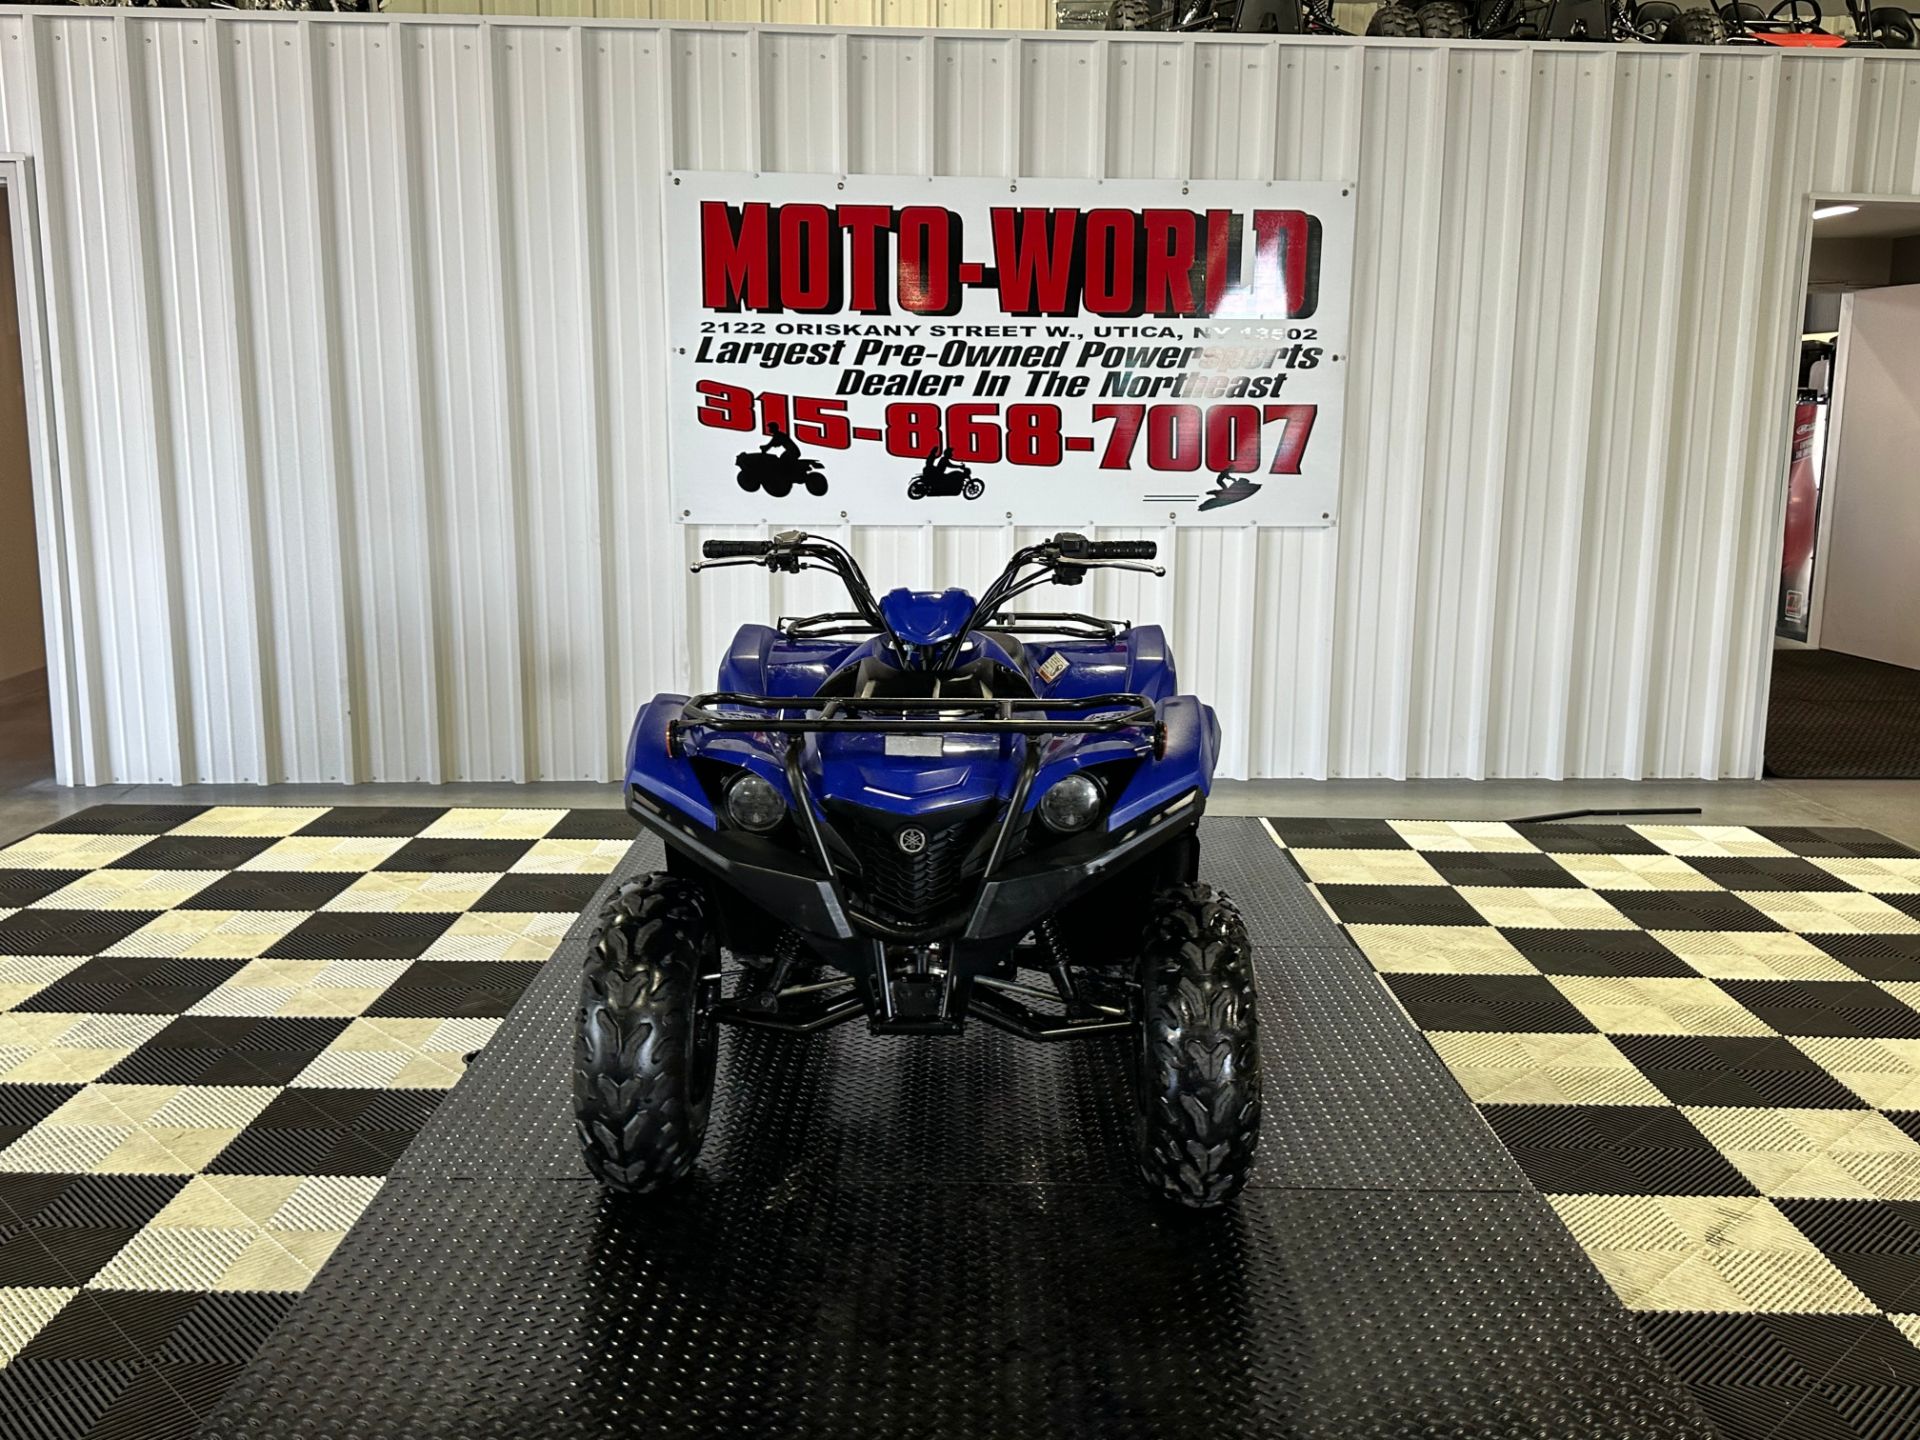 2019 Yamaha Grizzly 90 in Utica, New York - Photo 6